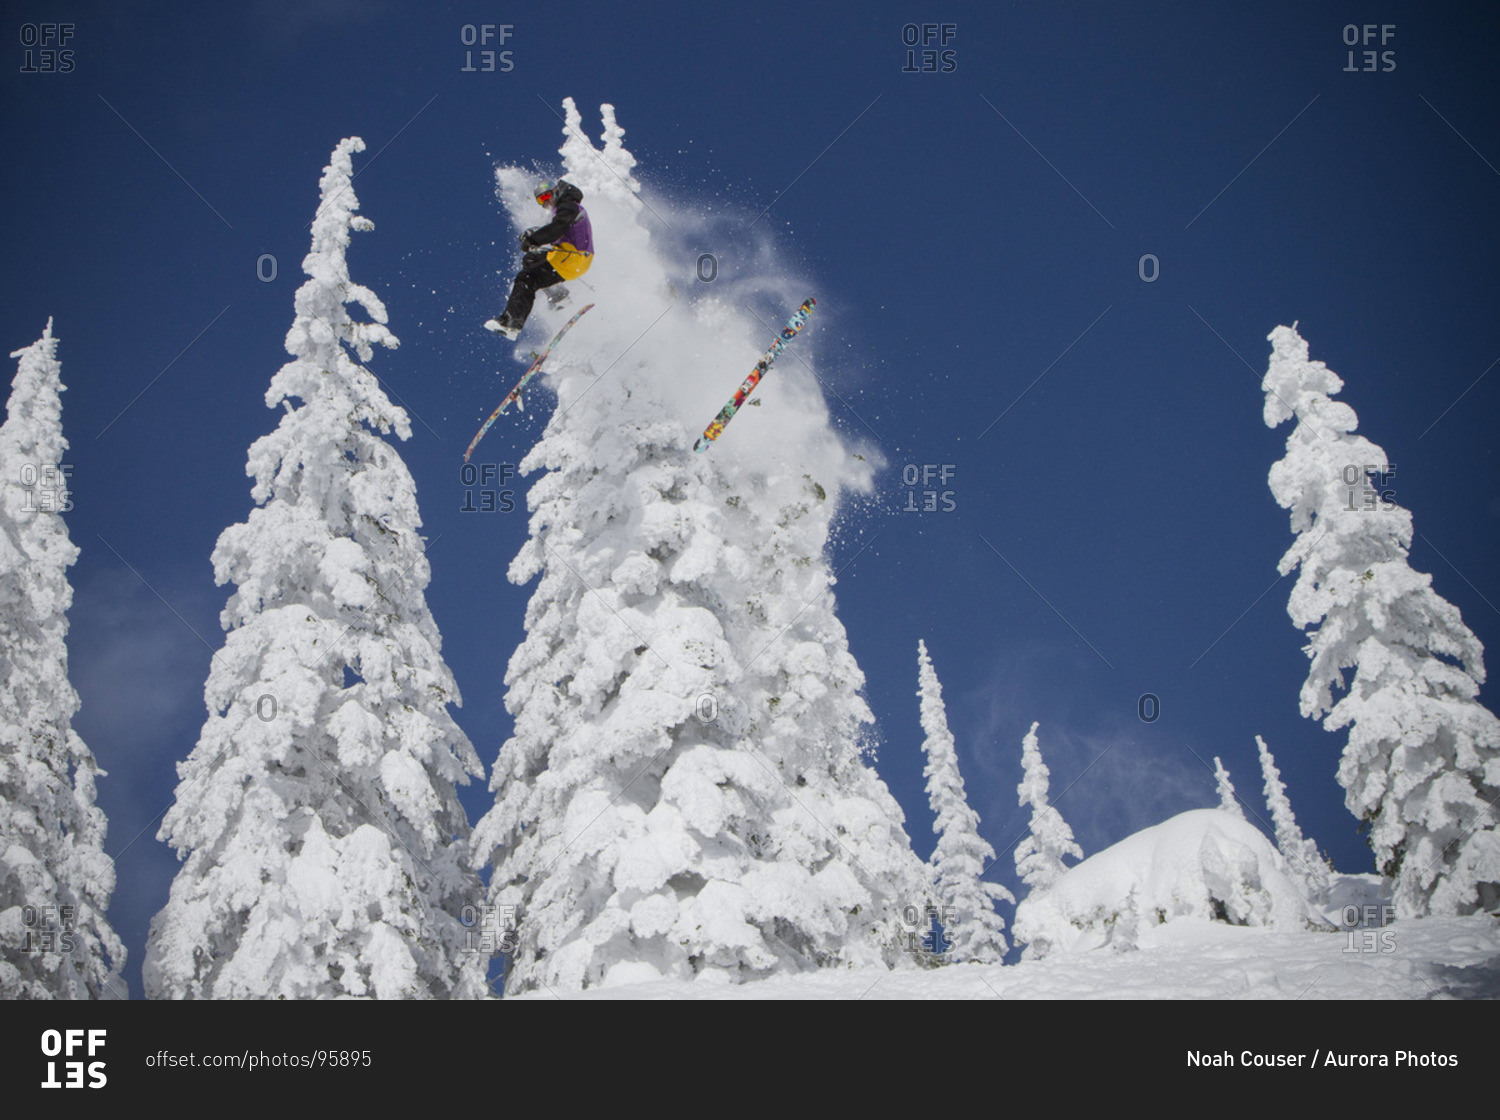 A skier crashes into a tree while in mid air on a bluebird day.